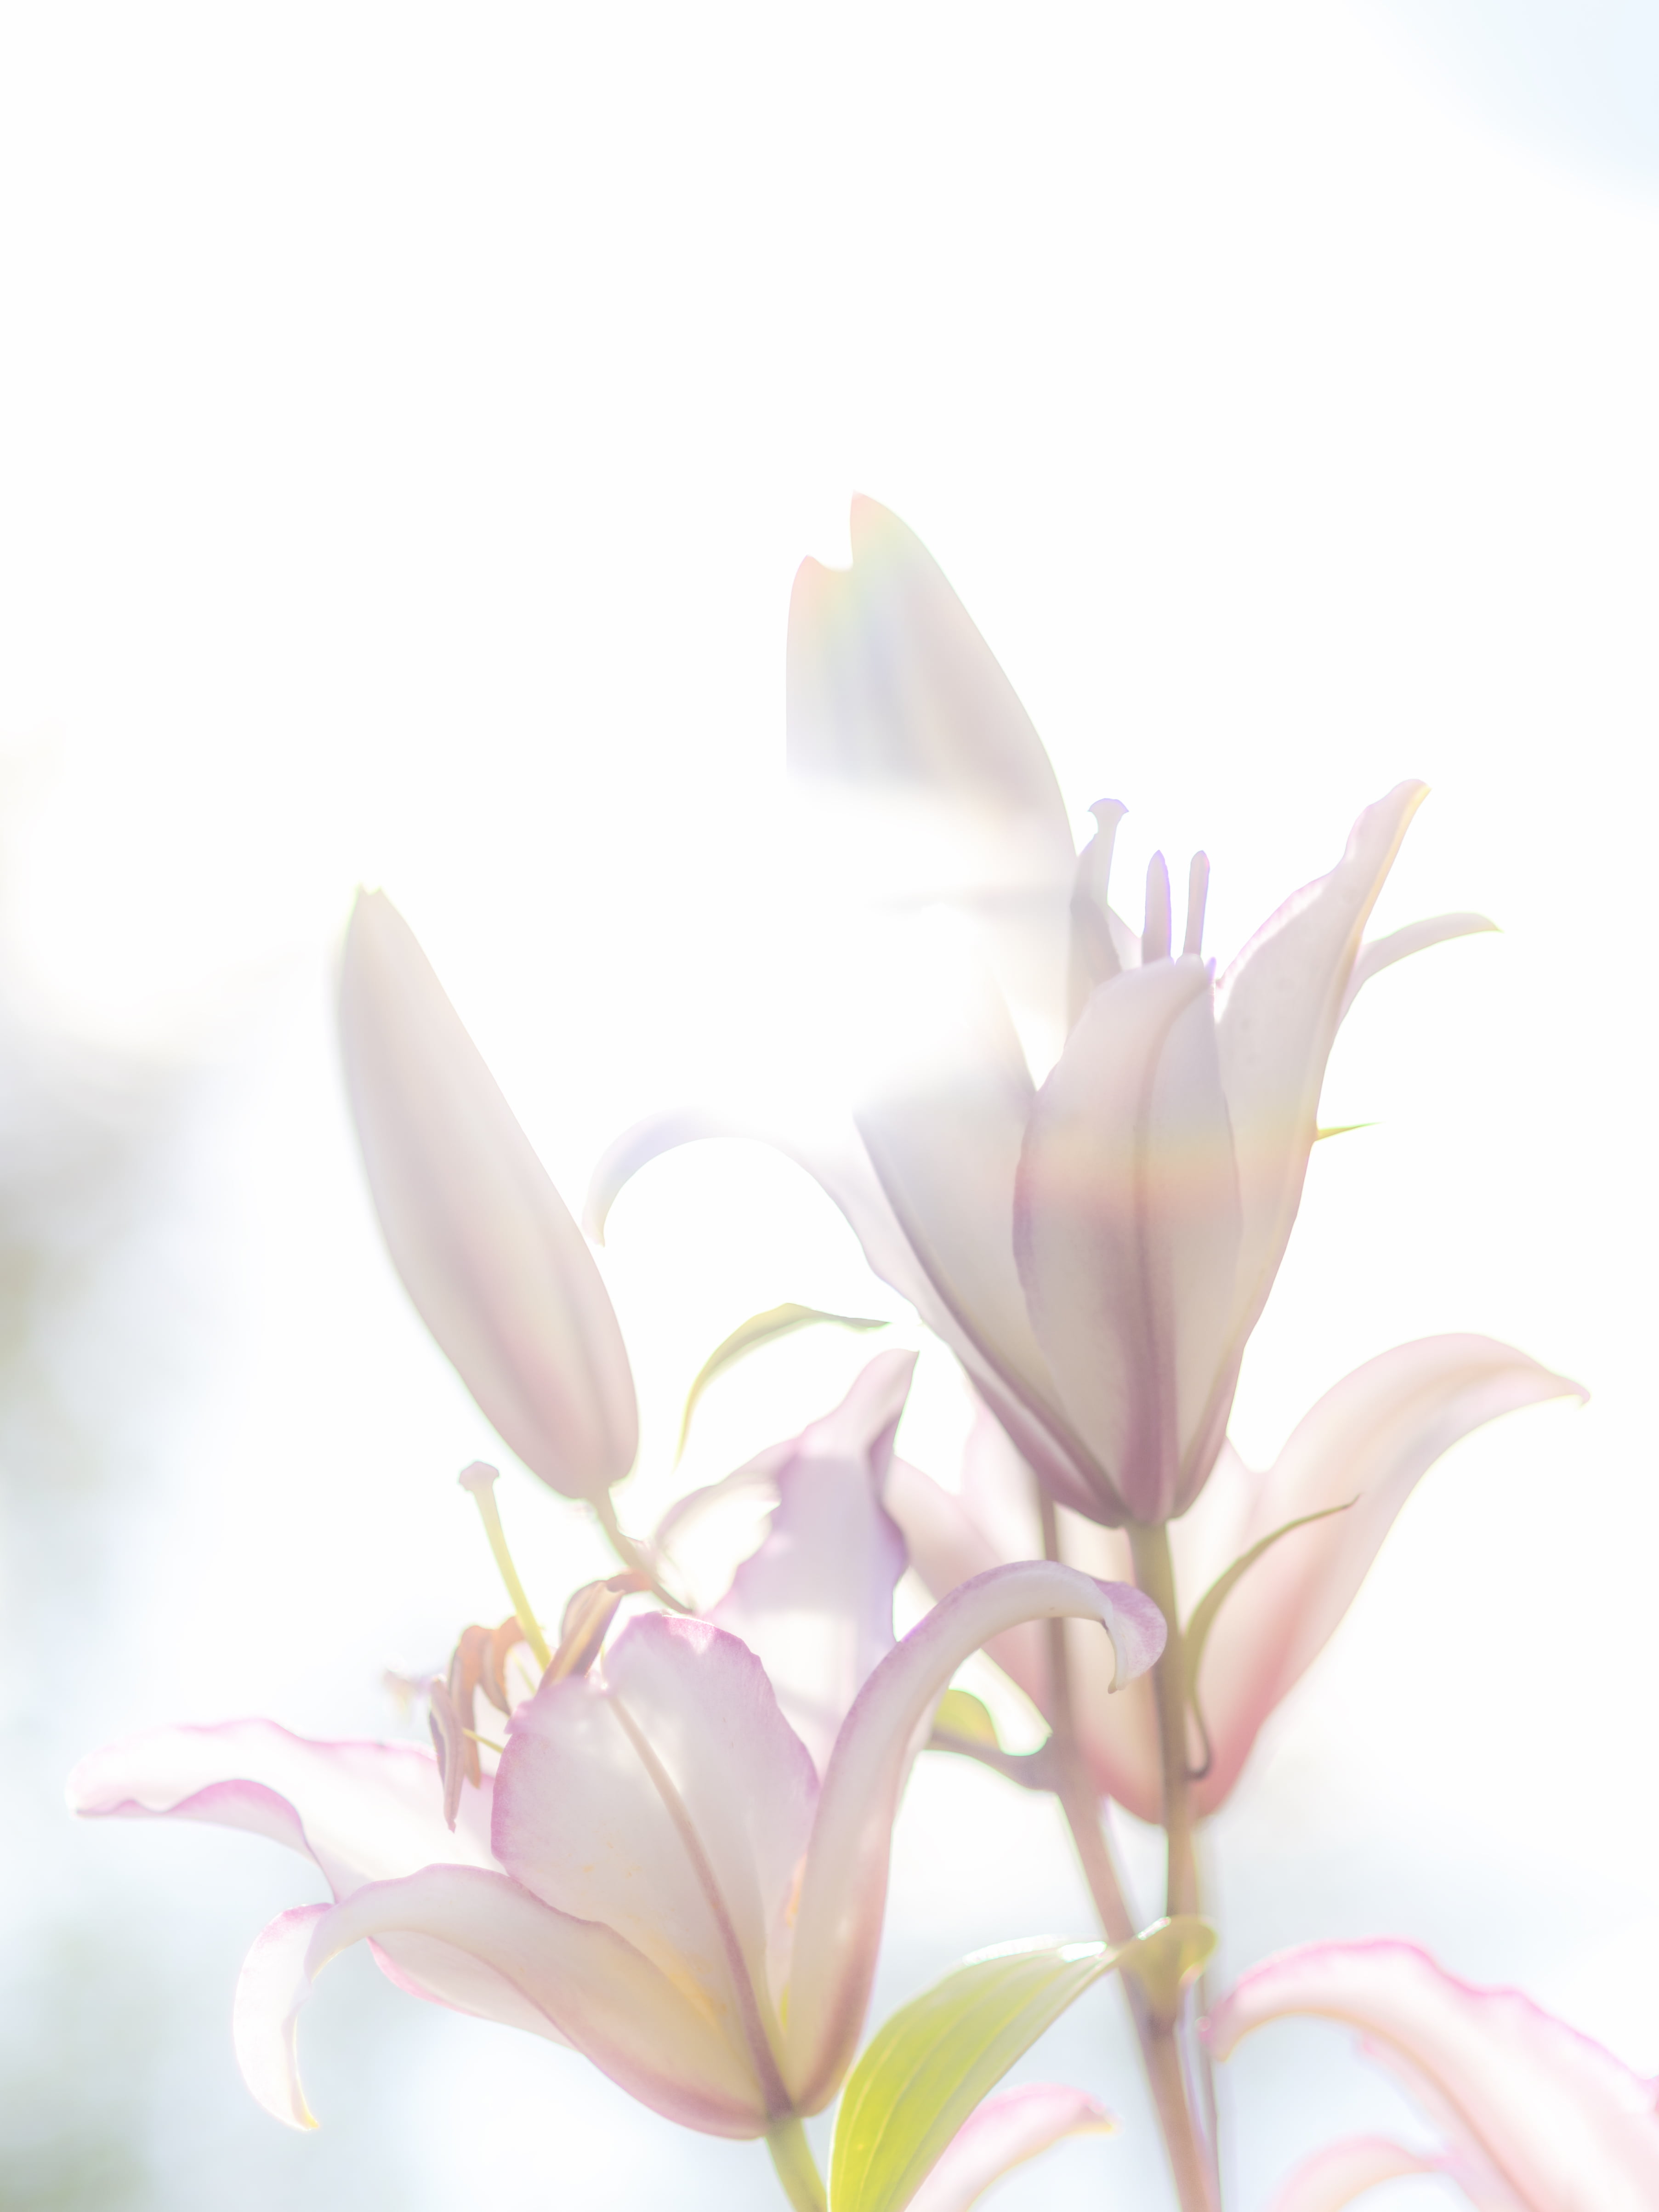 Lilies Iphone Wallpapers